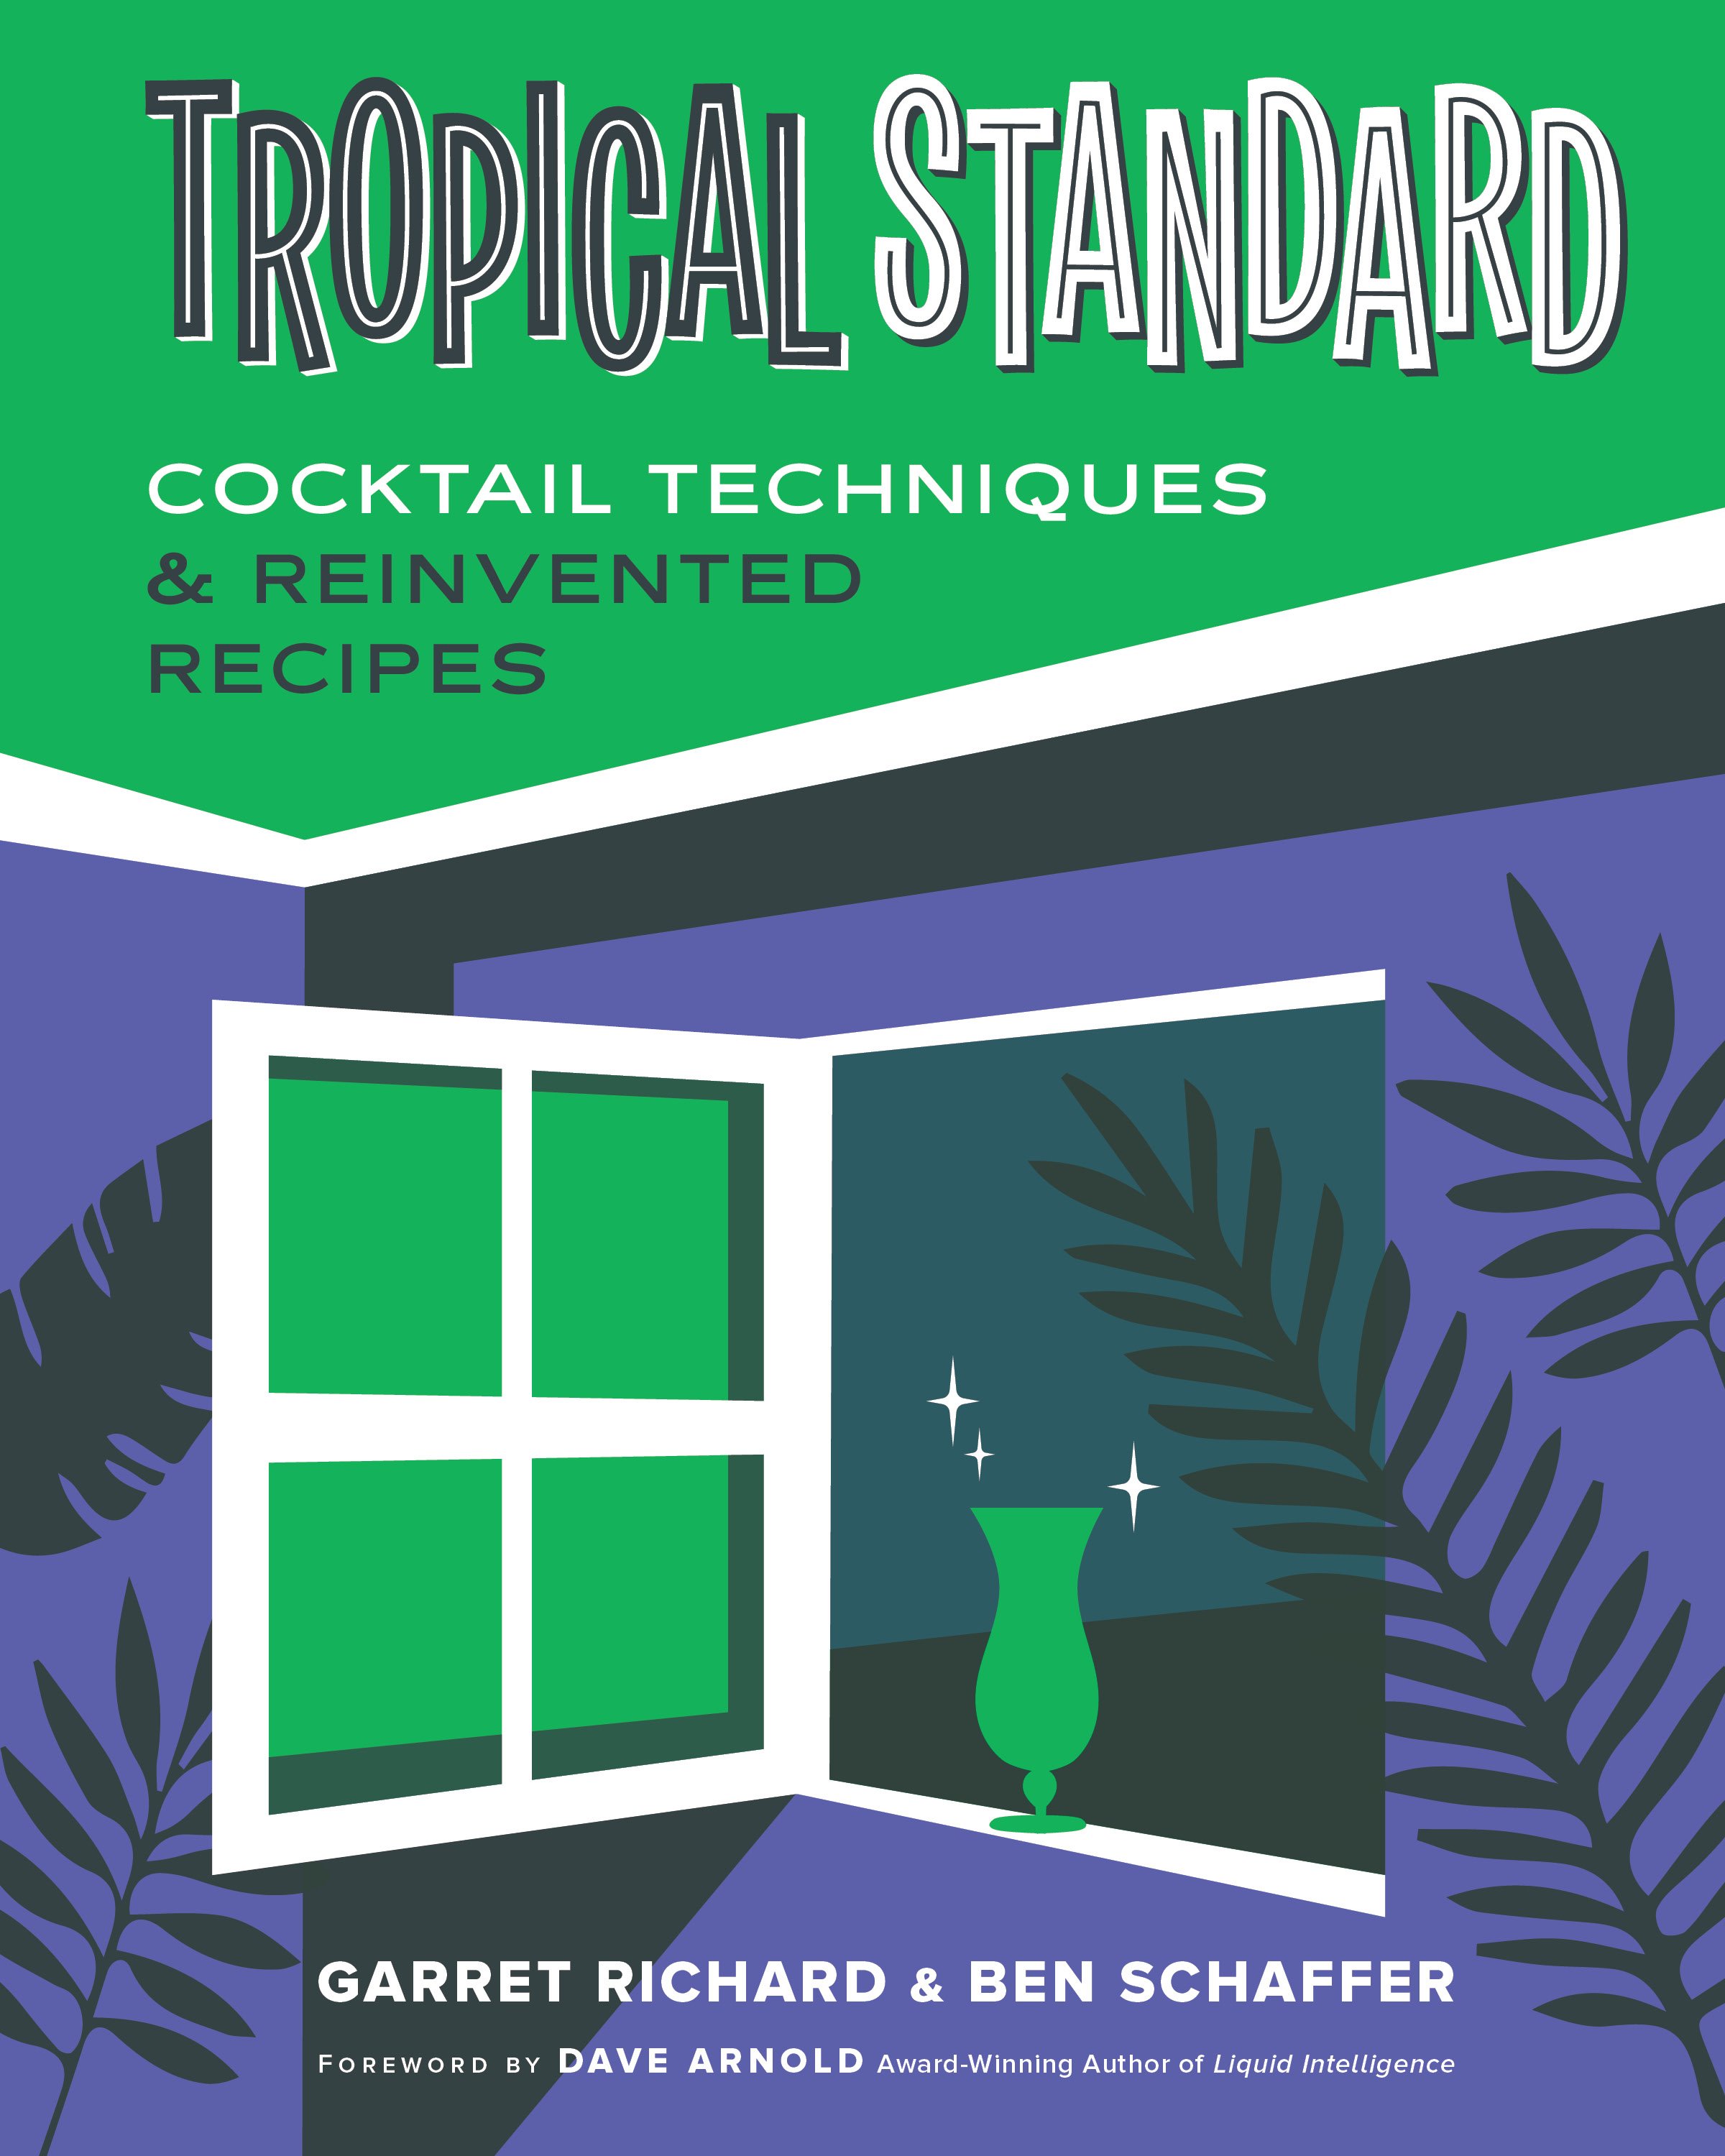 Boozy Book Review: Tropical Standard